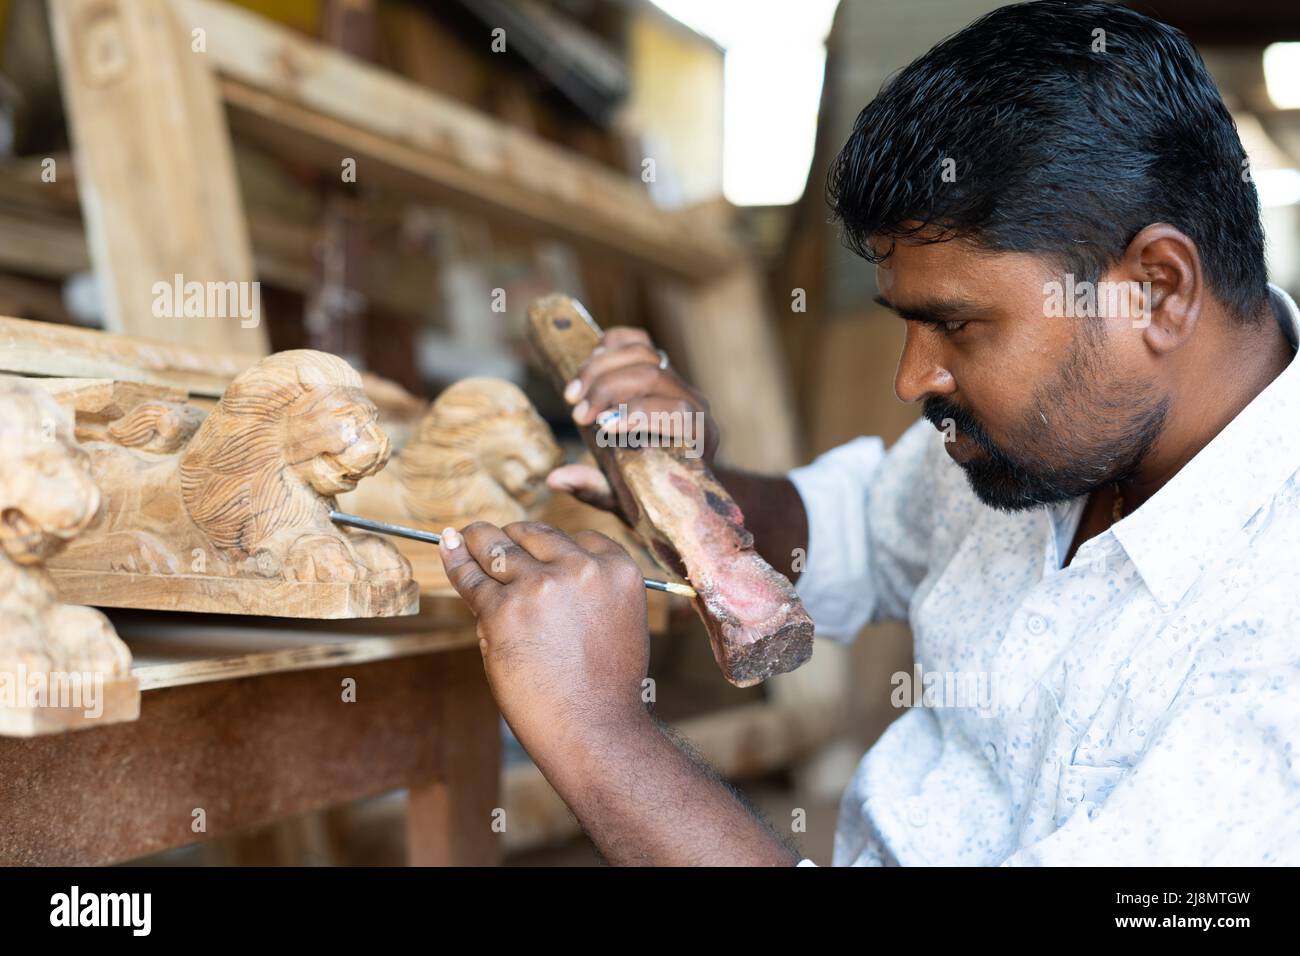 carpenter busy making wood design by shaping using carpentry tools at shop - concept of creativity, skilled labour and wood worker Stock Photo